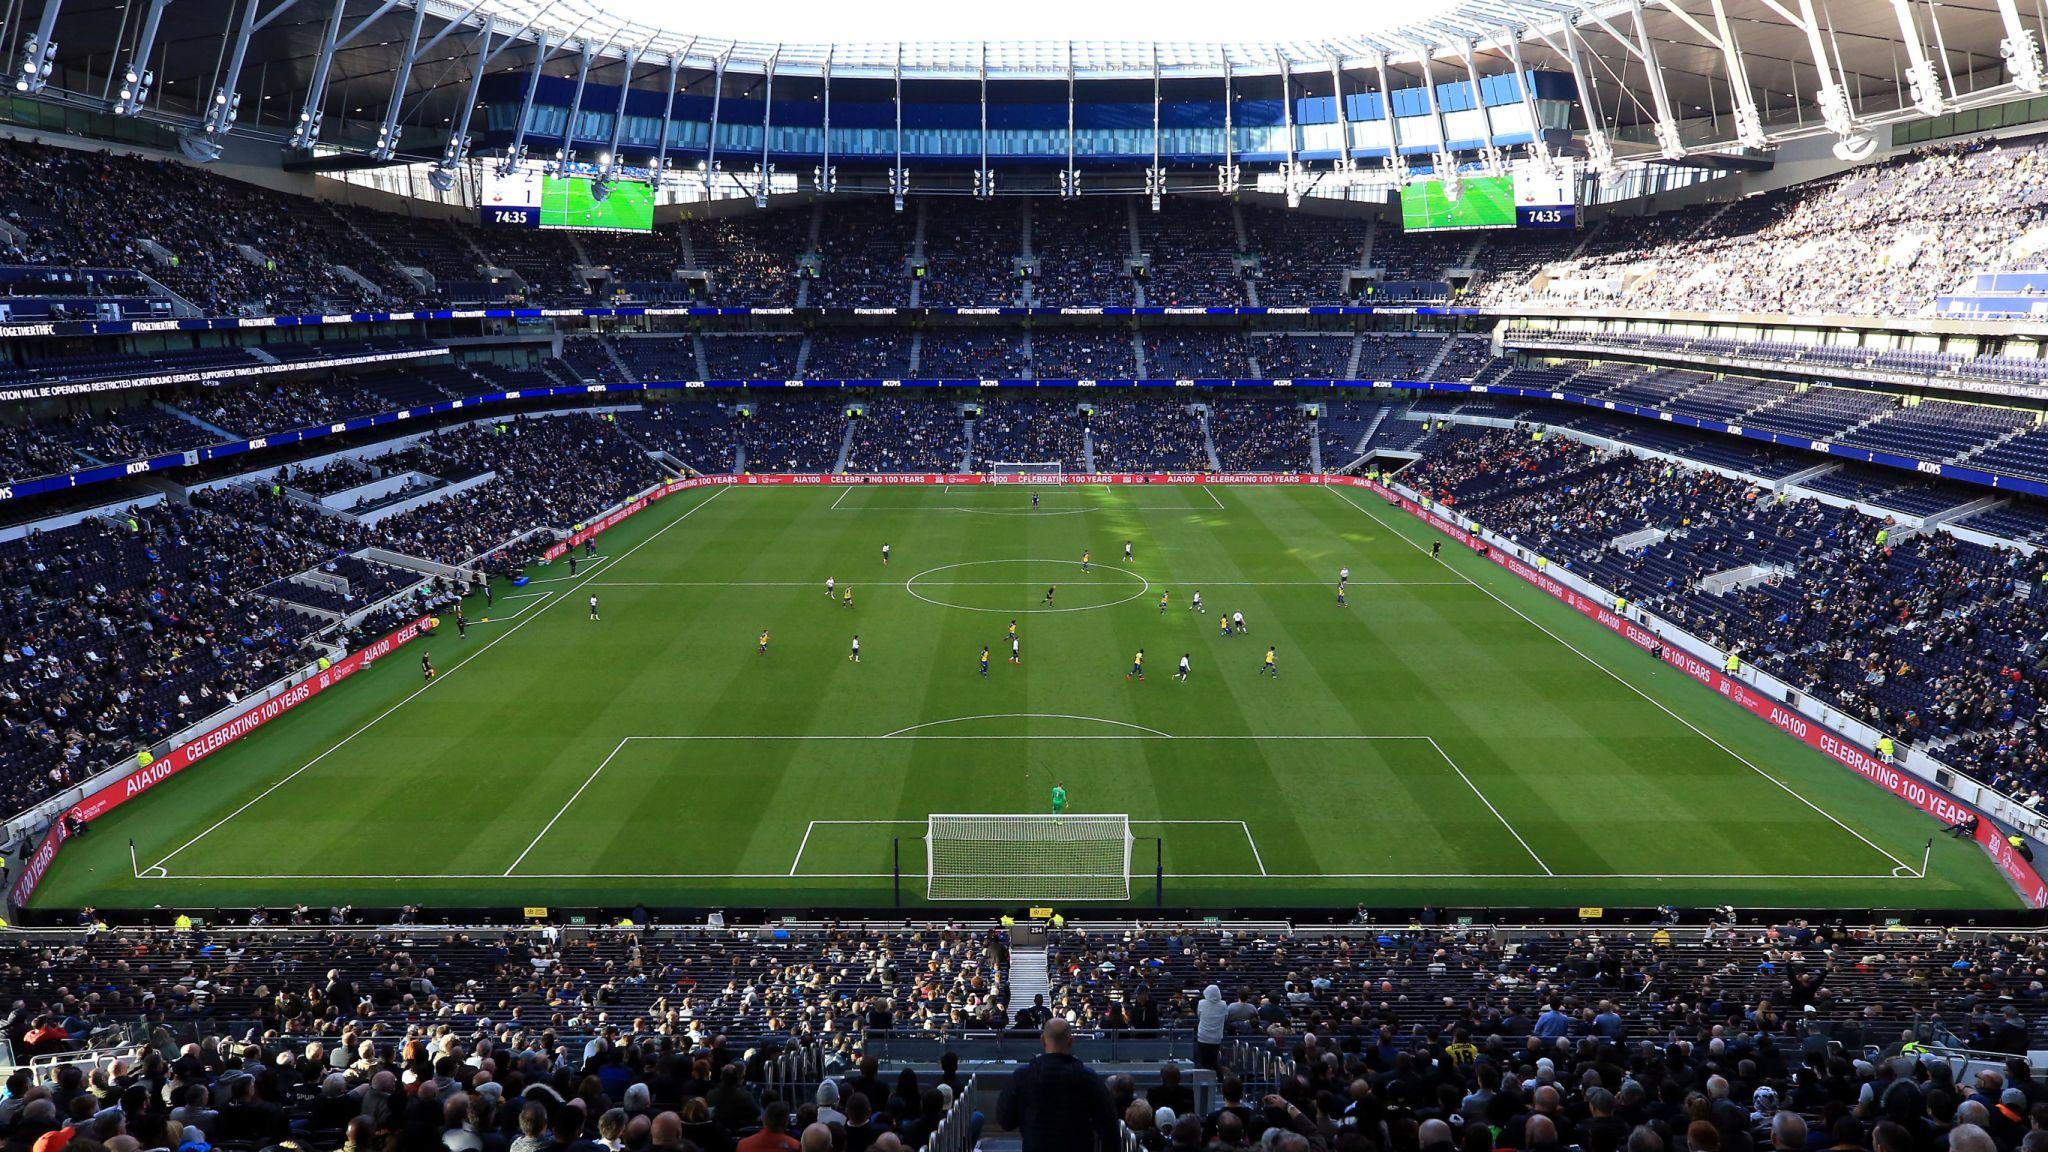 Tottenham's new stadium: All you need to know about Spurs